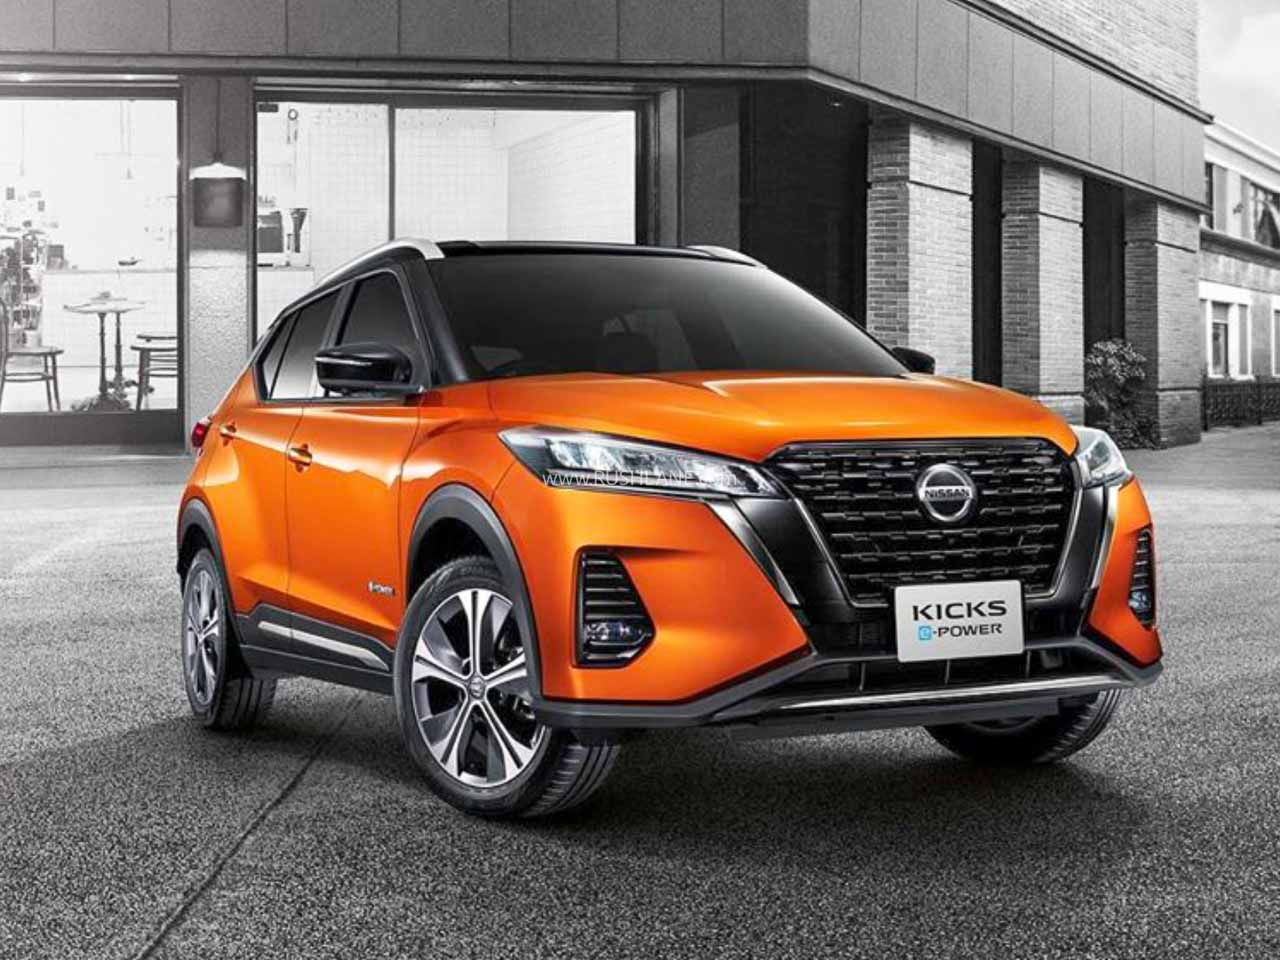 2020 Nissan Kicks hybrid revealed - BS6 model yet to launch in India